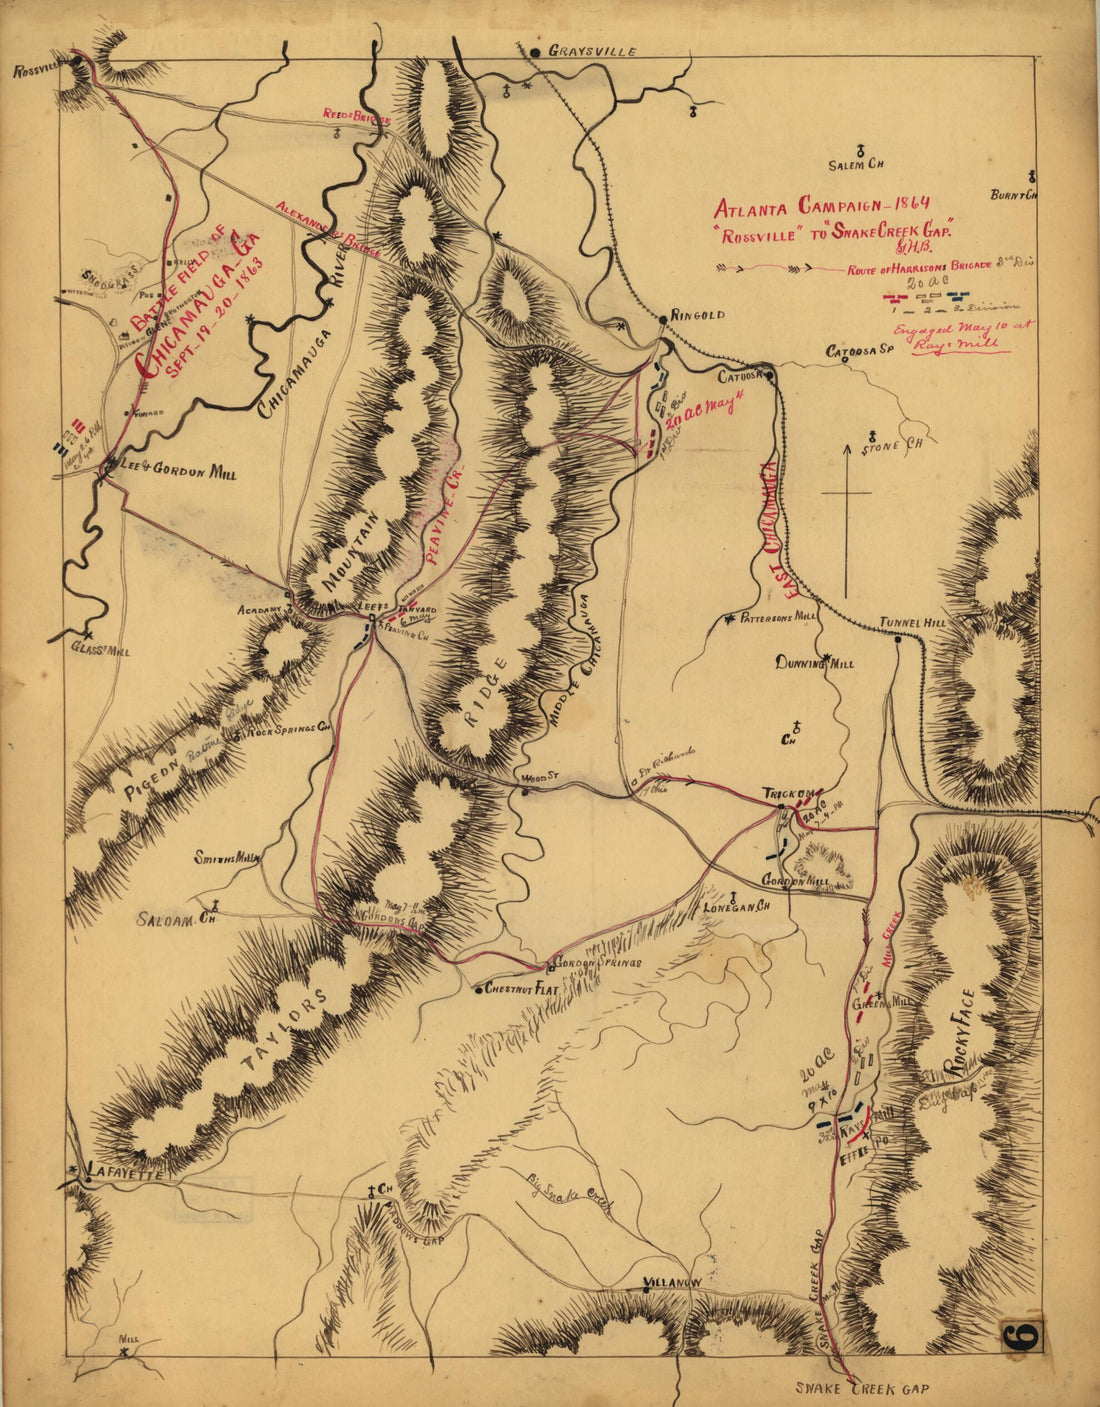 This old map of . Rossville to Snake Creek Gap. from 1864 was created by G. H. Blakeslee in 1864